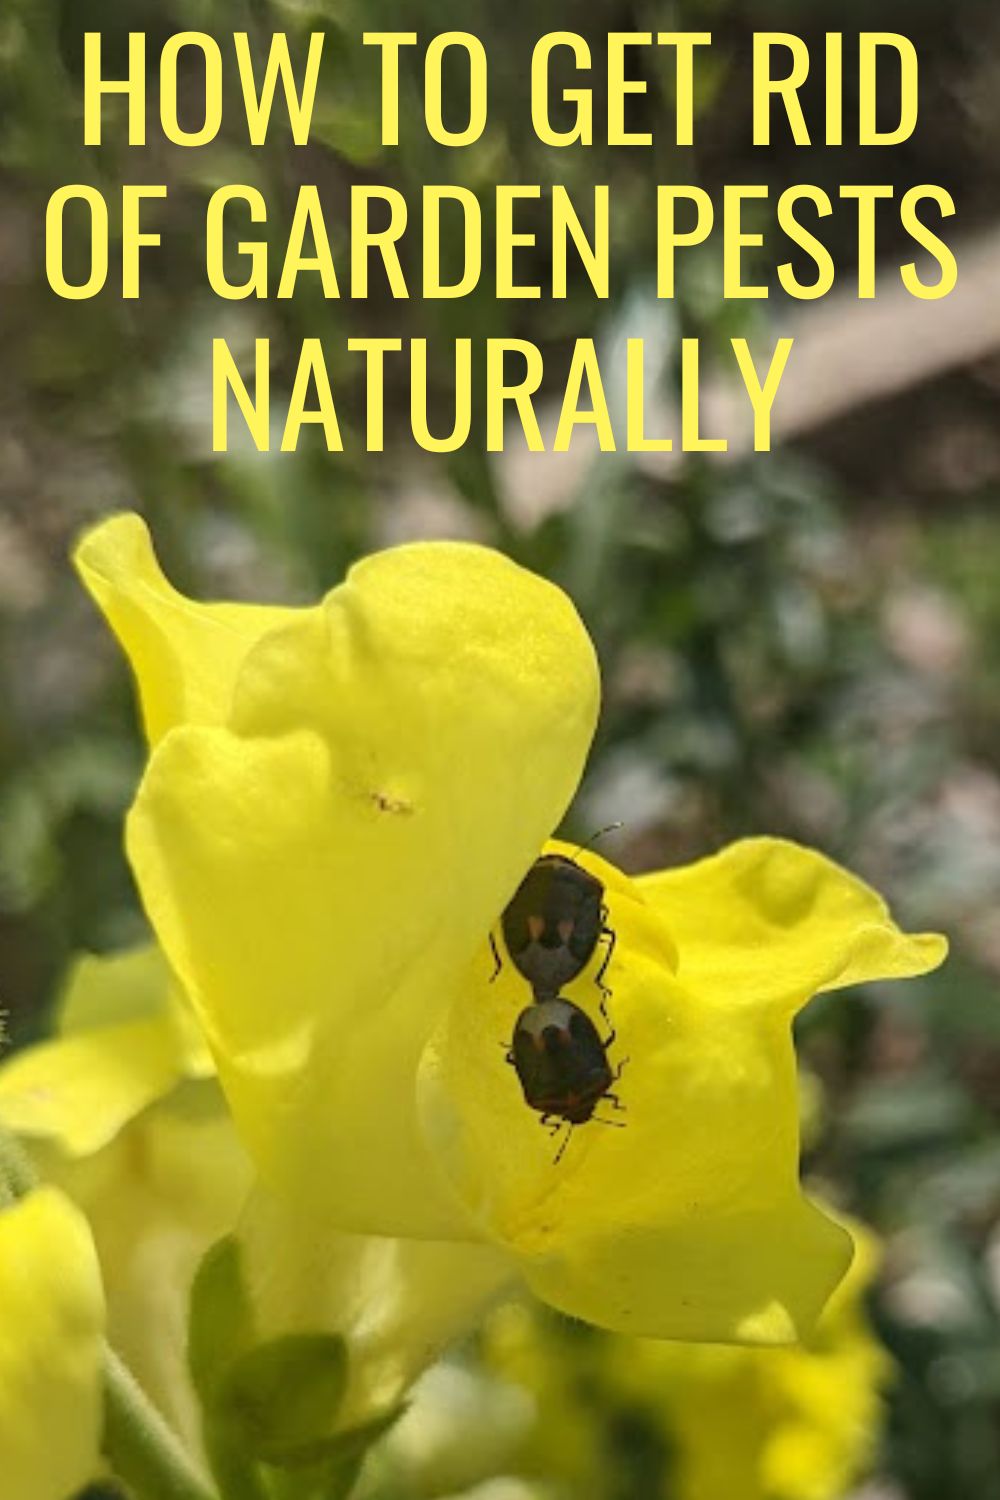 How to get rid of garden pests naturally